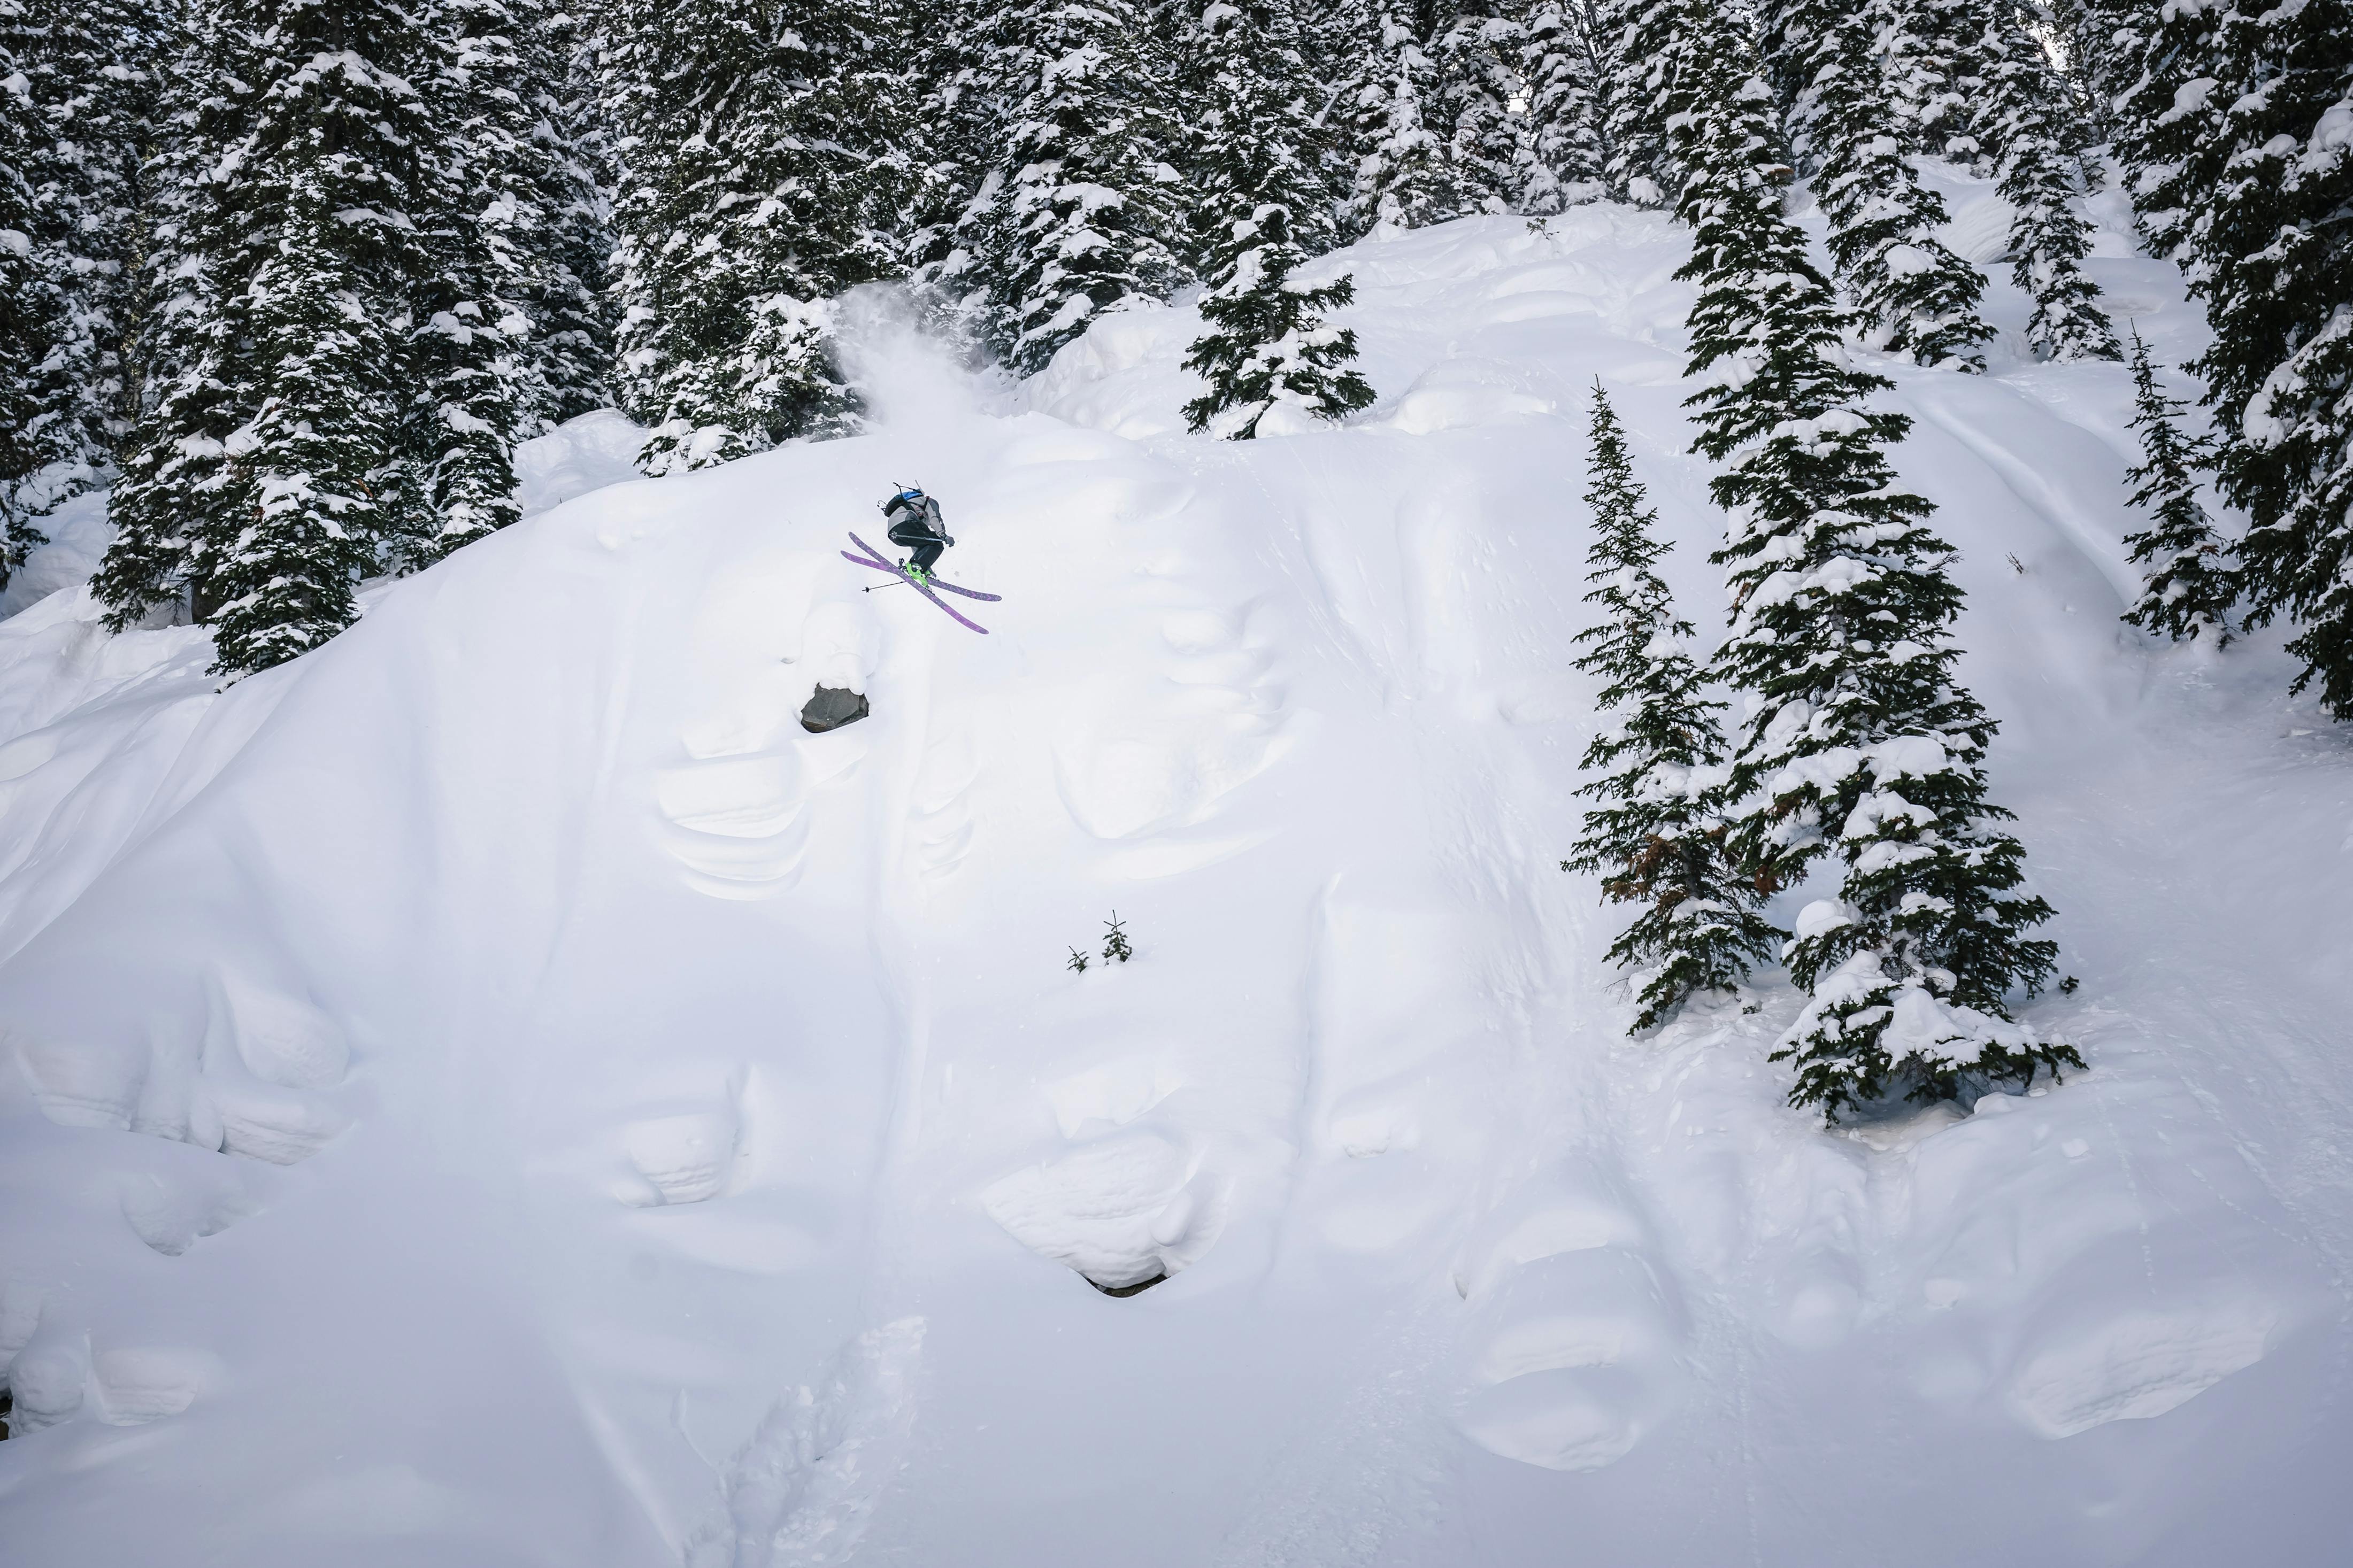 Black Diamond athlete Isaac Freeland sending a cliff drop in the backcountry.